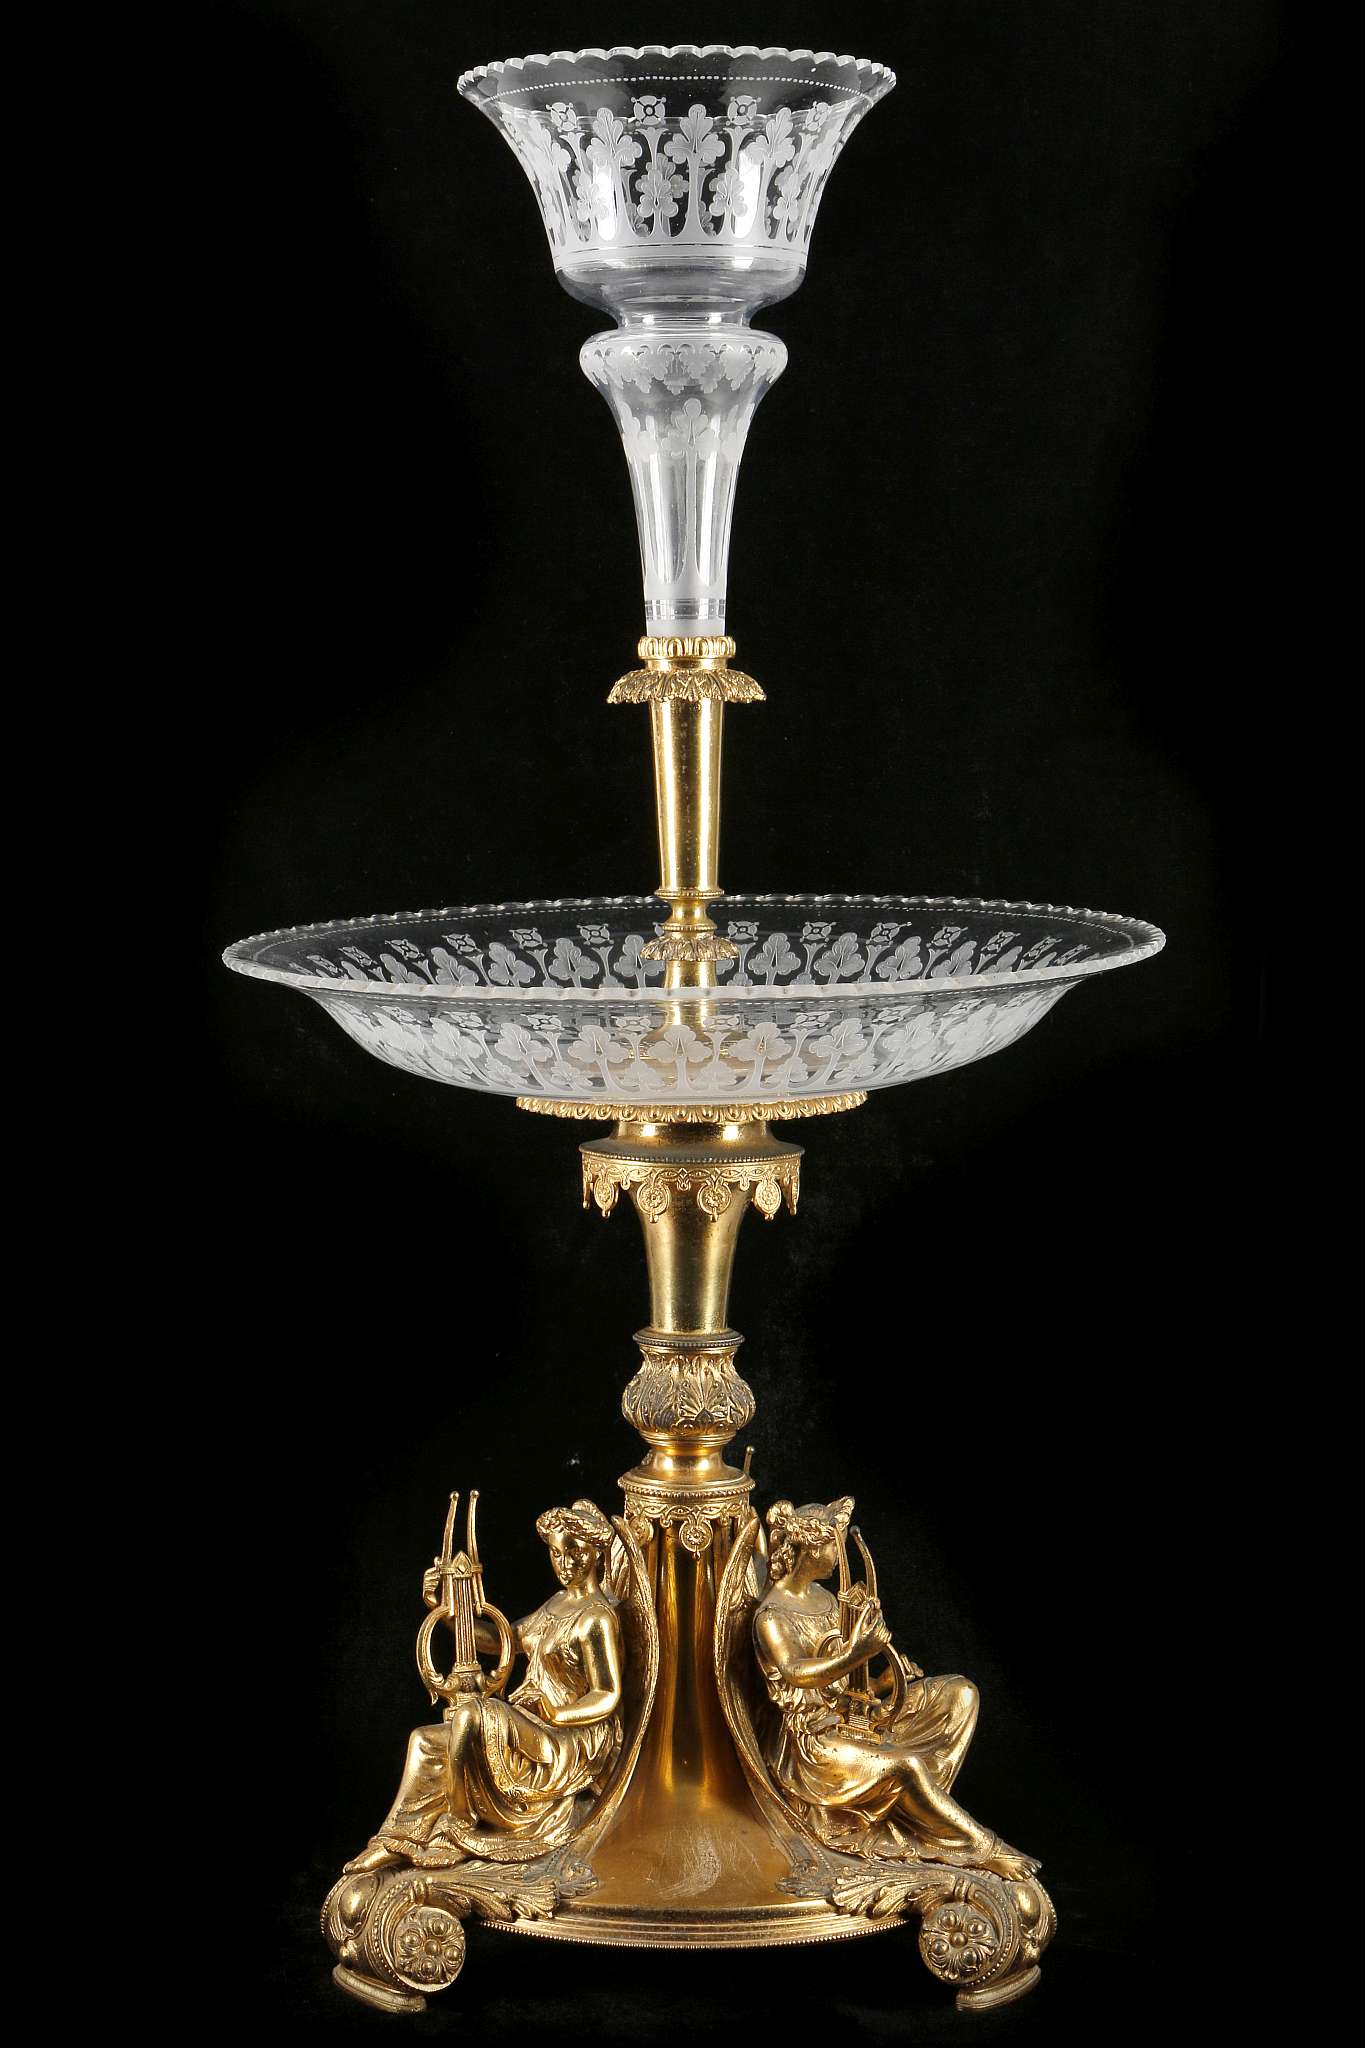 A VERY FINE GILT BRONZE AND ETCHED GLASS TABLE CENTREPIECE, late 19th century, by Horace - Image 2 of 6